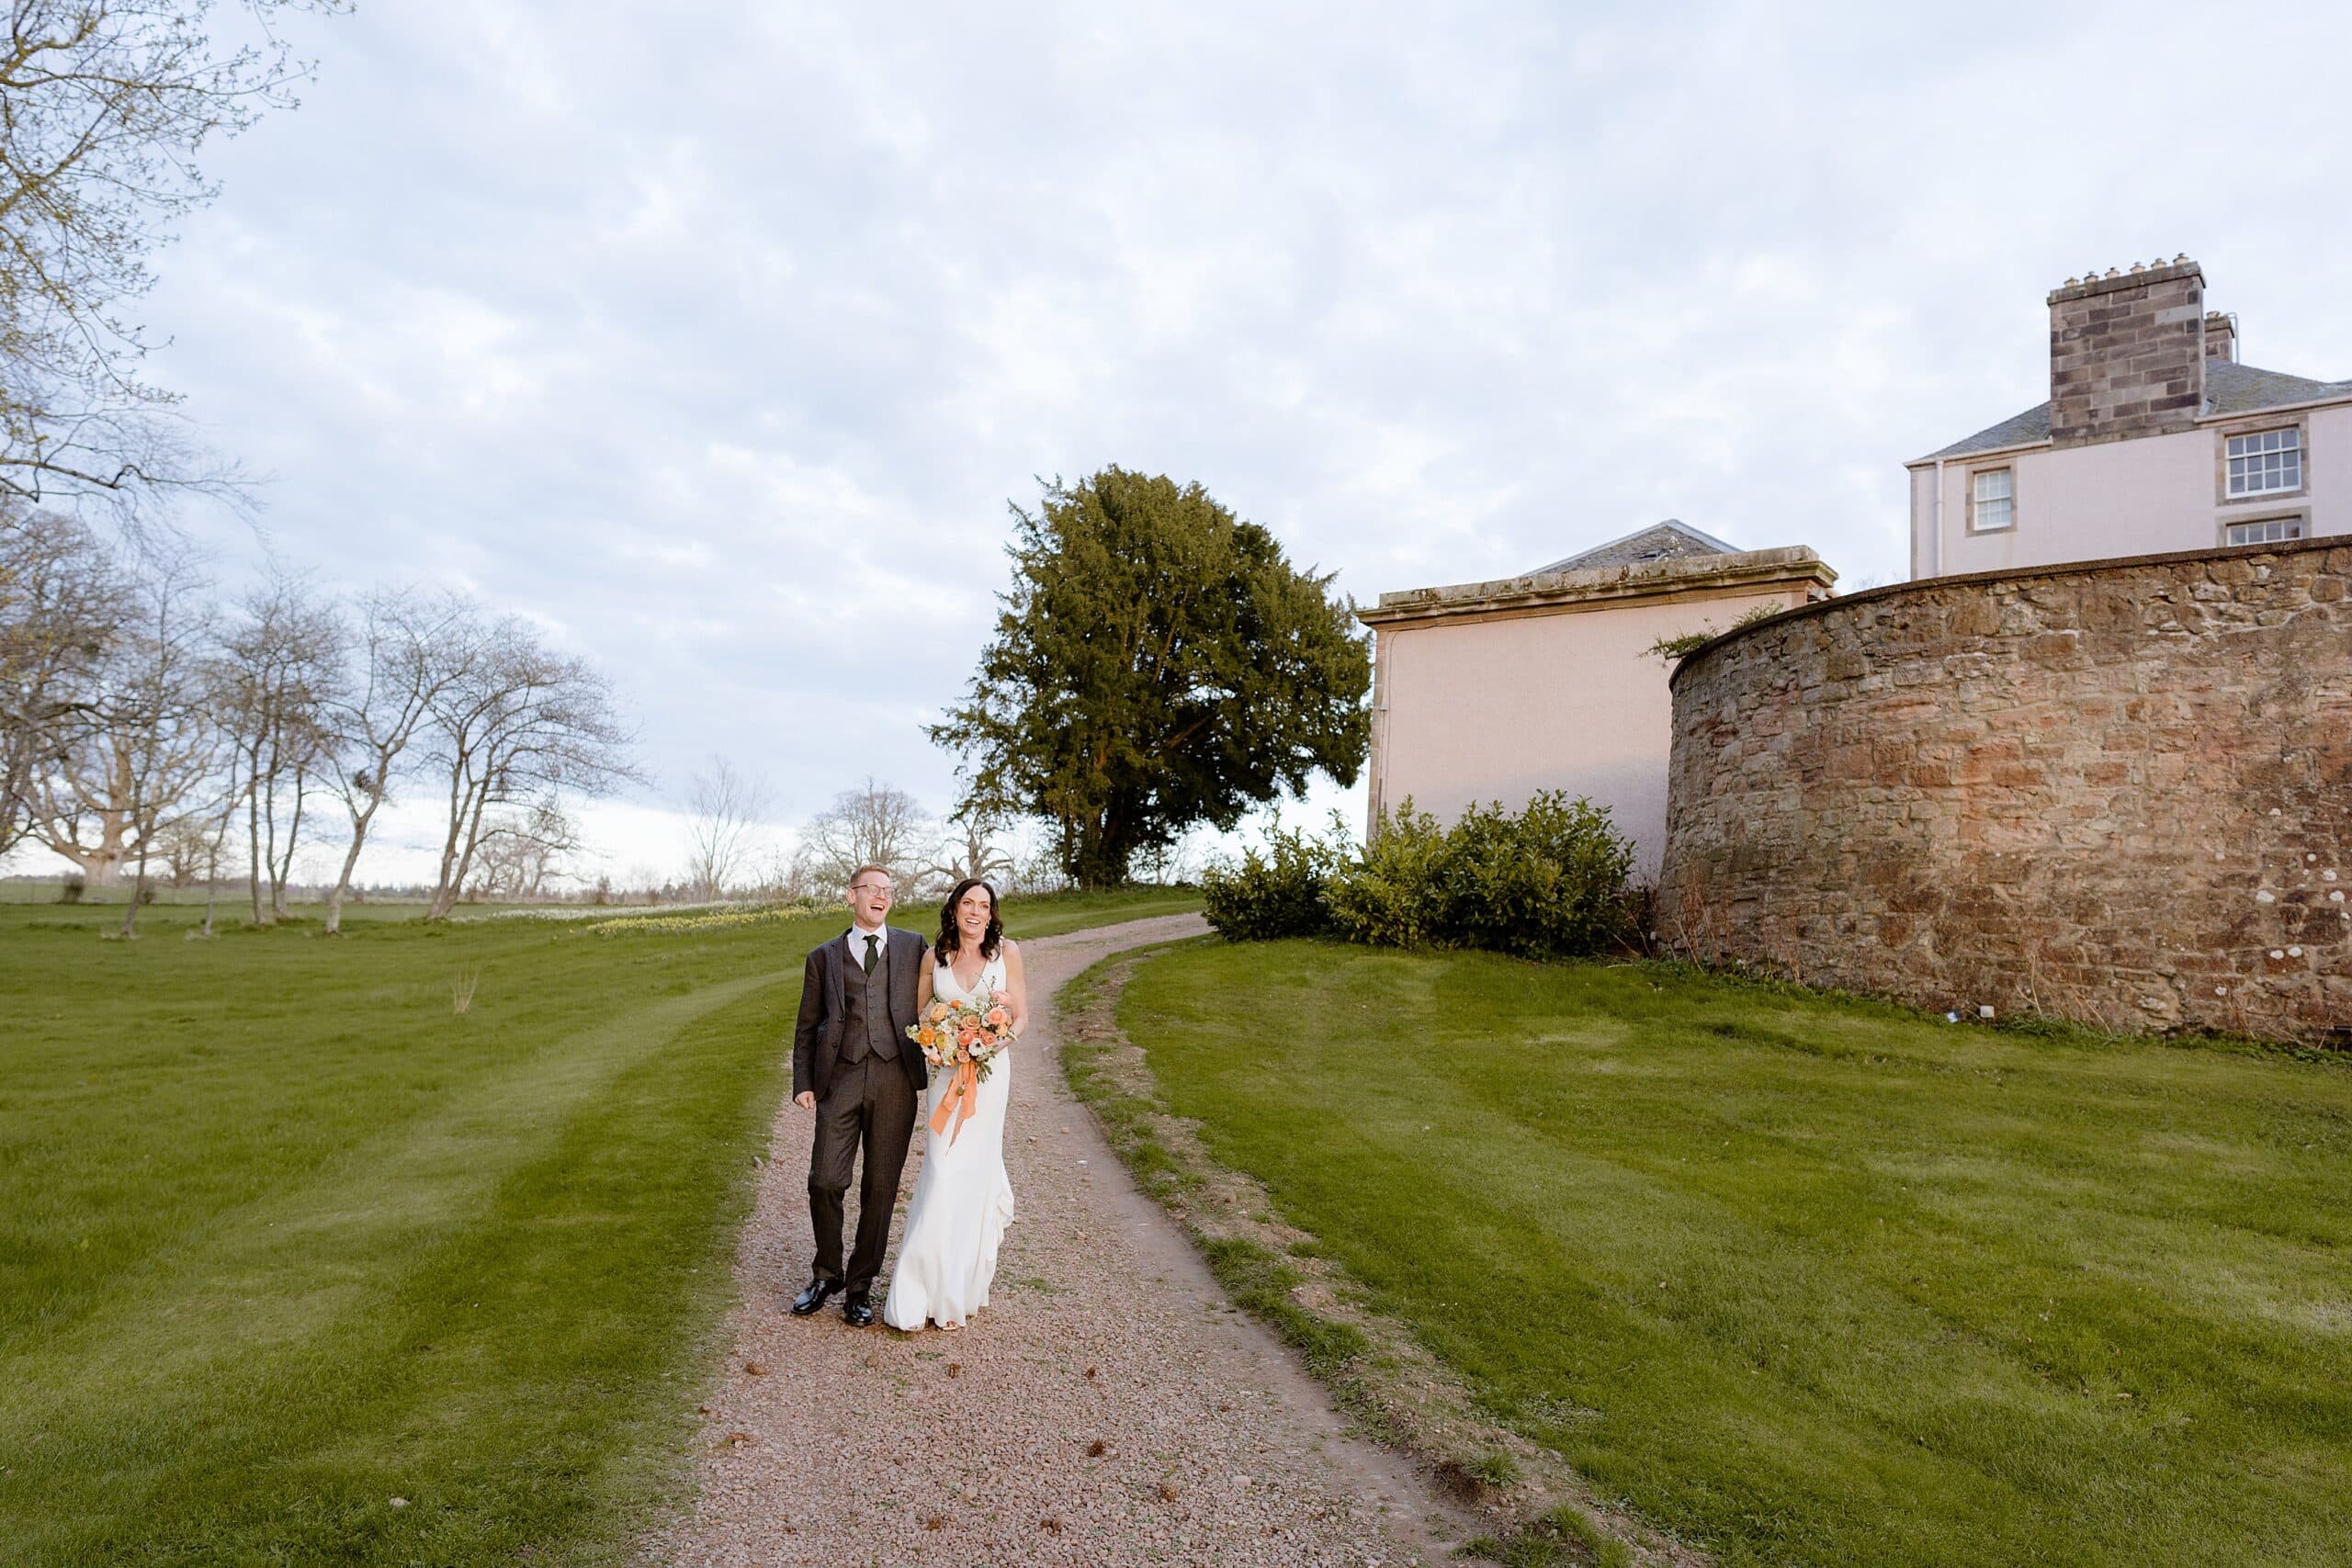 the bride and groom walking down a stone path with lawn trees and a farm building in the background following their unusual wedding venues east lothian wedding ceremony near edinburgh scotland